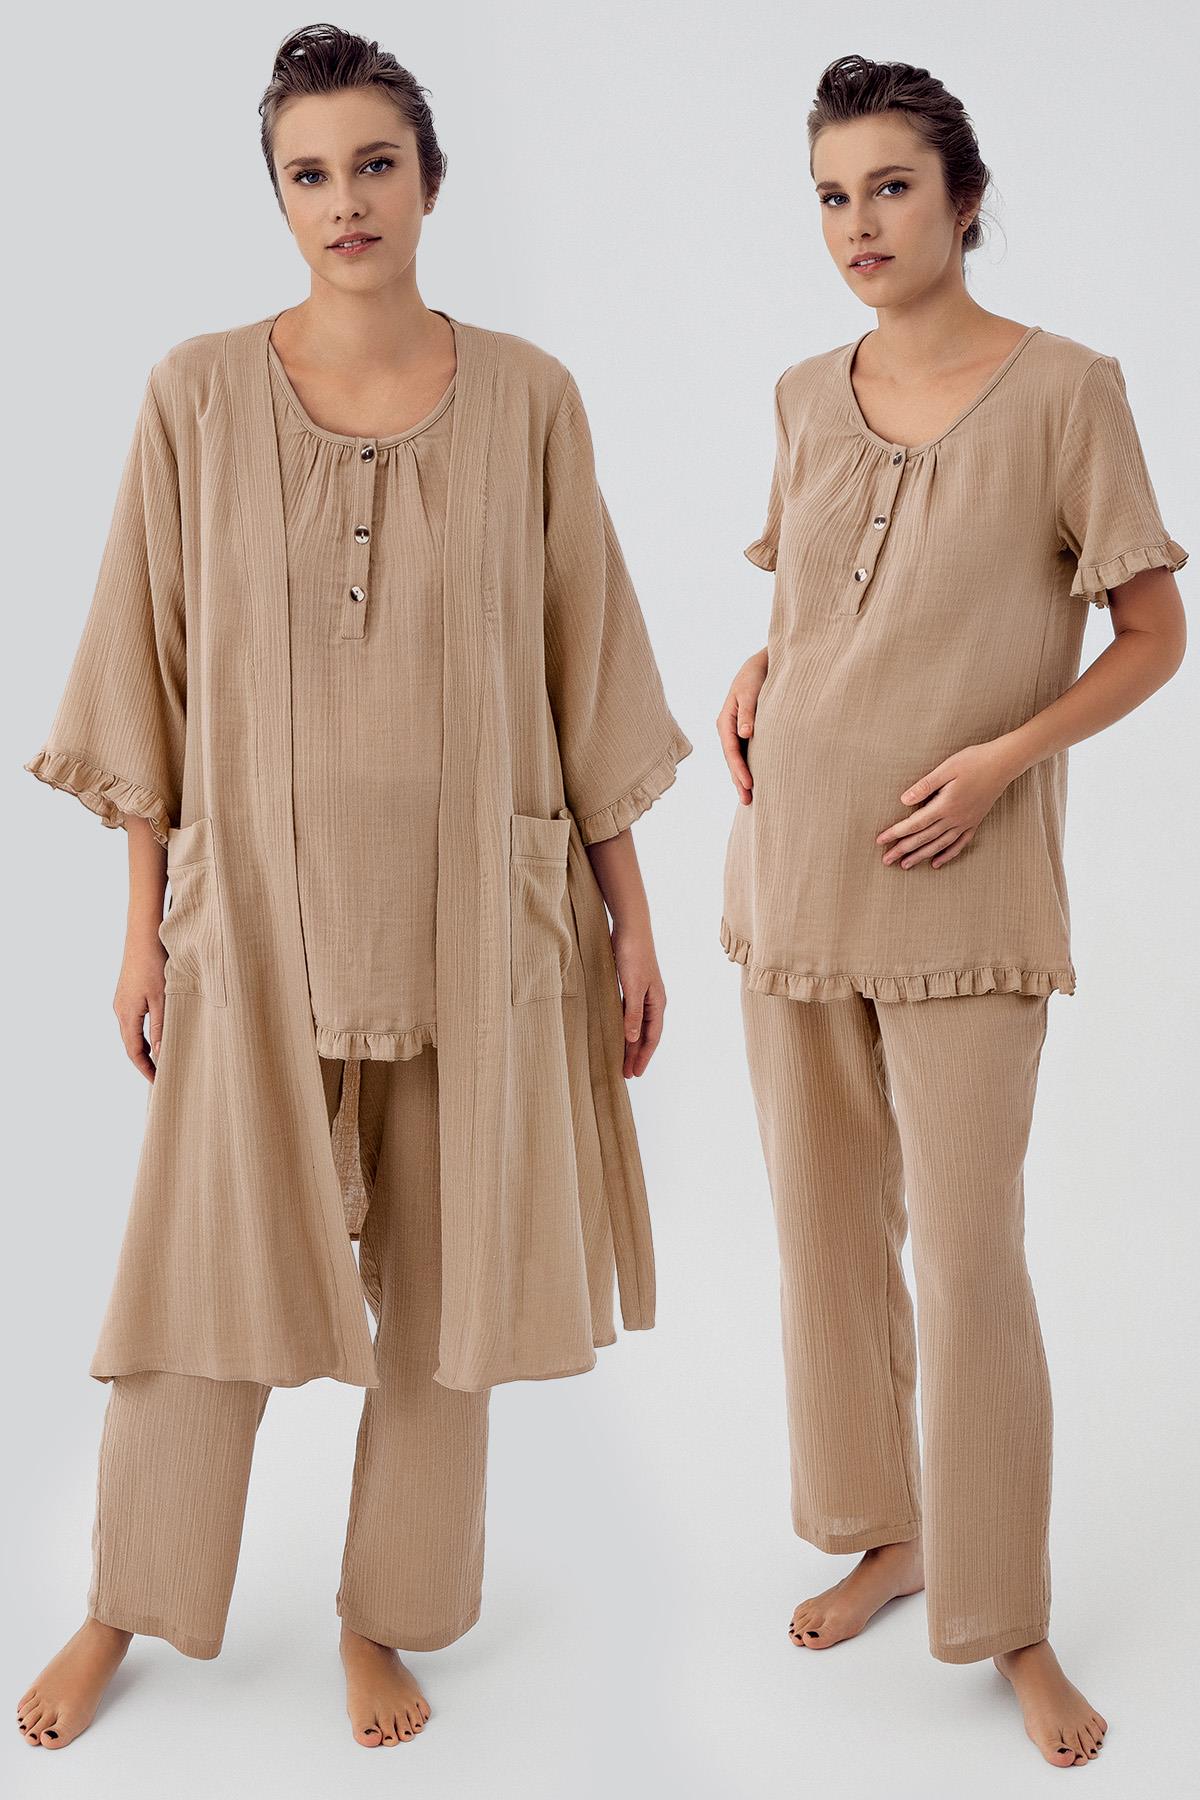 Double Layer Muslin Cotton Adjustable High Waist Buttoned Maternity Dressing Gown Pajama Set M308